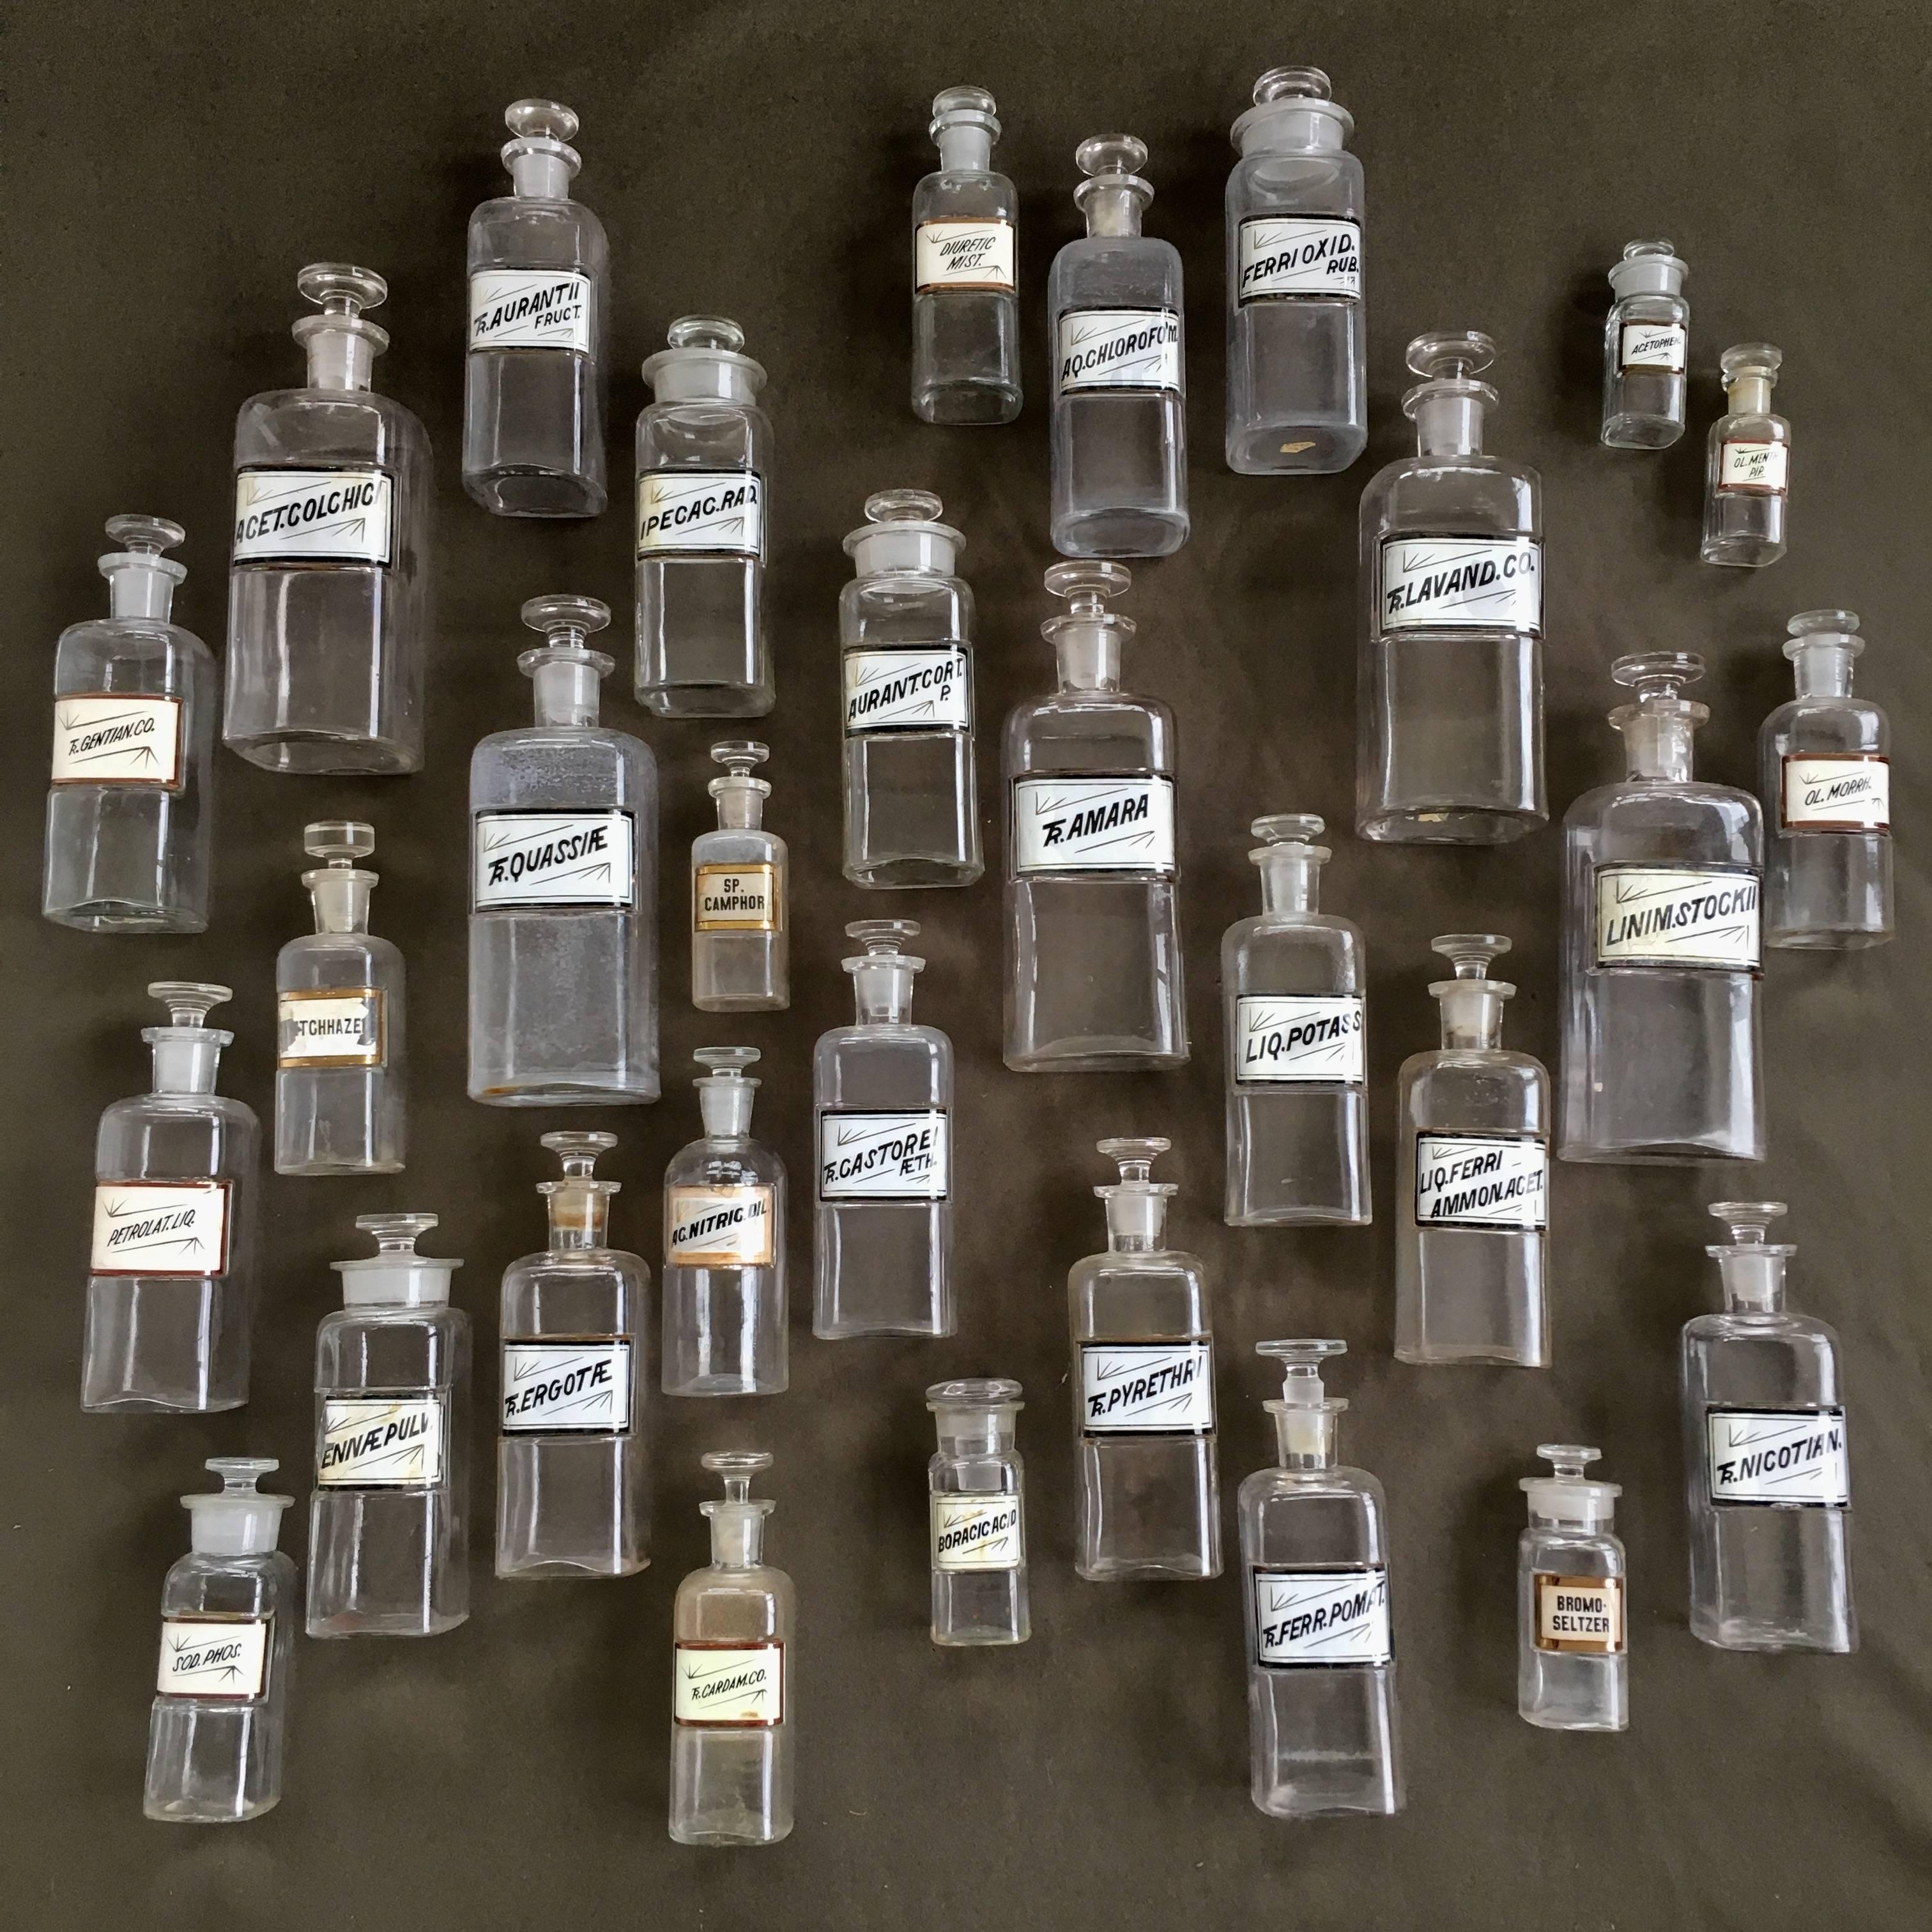 Impressive collection of 31 19th century apothecary bottles. Made in the USA in 1889 (each marked on the bottom).
Largest measures: 9.75" H x 3.5" W x 3.25" D.
Smallest measures: 4" H x 1.5" W x 1.5" D.